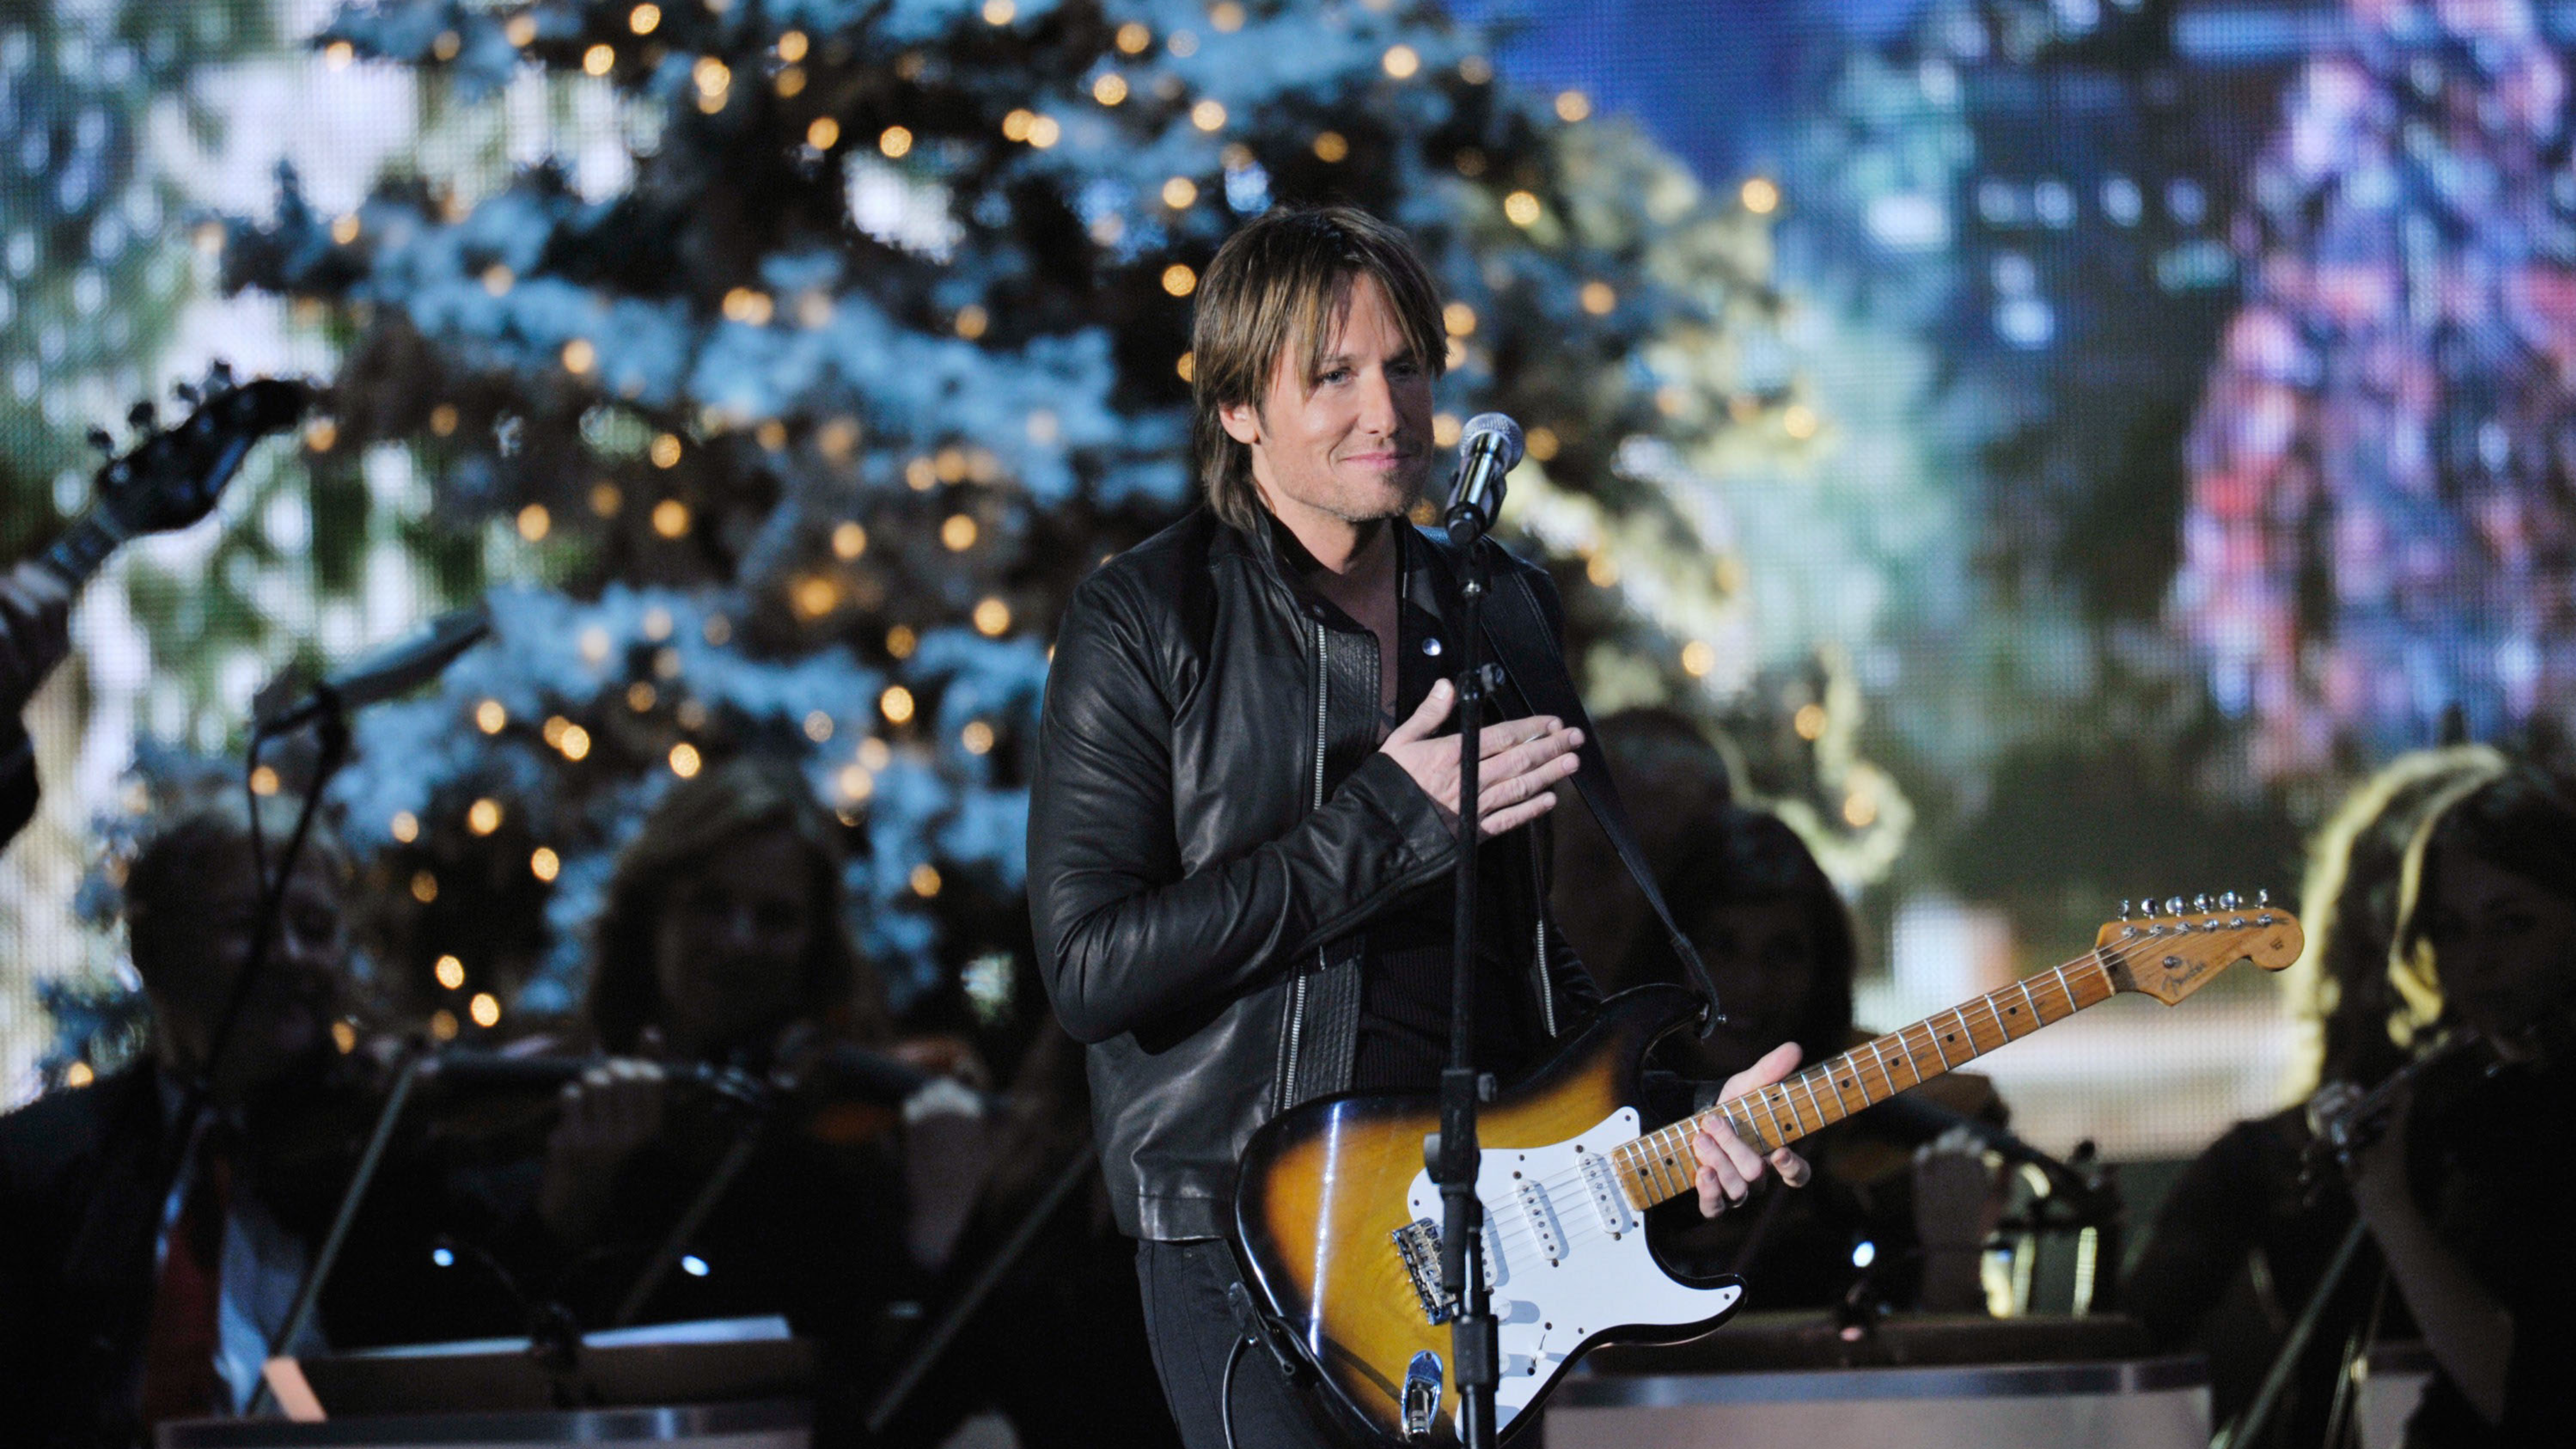 CMA COUNTRY CHRISTMAS - Country's biggest stars are joining together to celebrate the holidays! For the third year, Sugarland's Jennifer Nettles will host the "CMA Country Christmas" special, airing THURSDAY, DECEMBER 20 (9:00-11:00 p.m., ET), on Disney General Entertainment Content via Getty Images. 